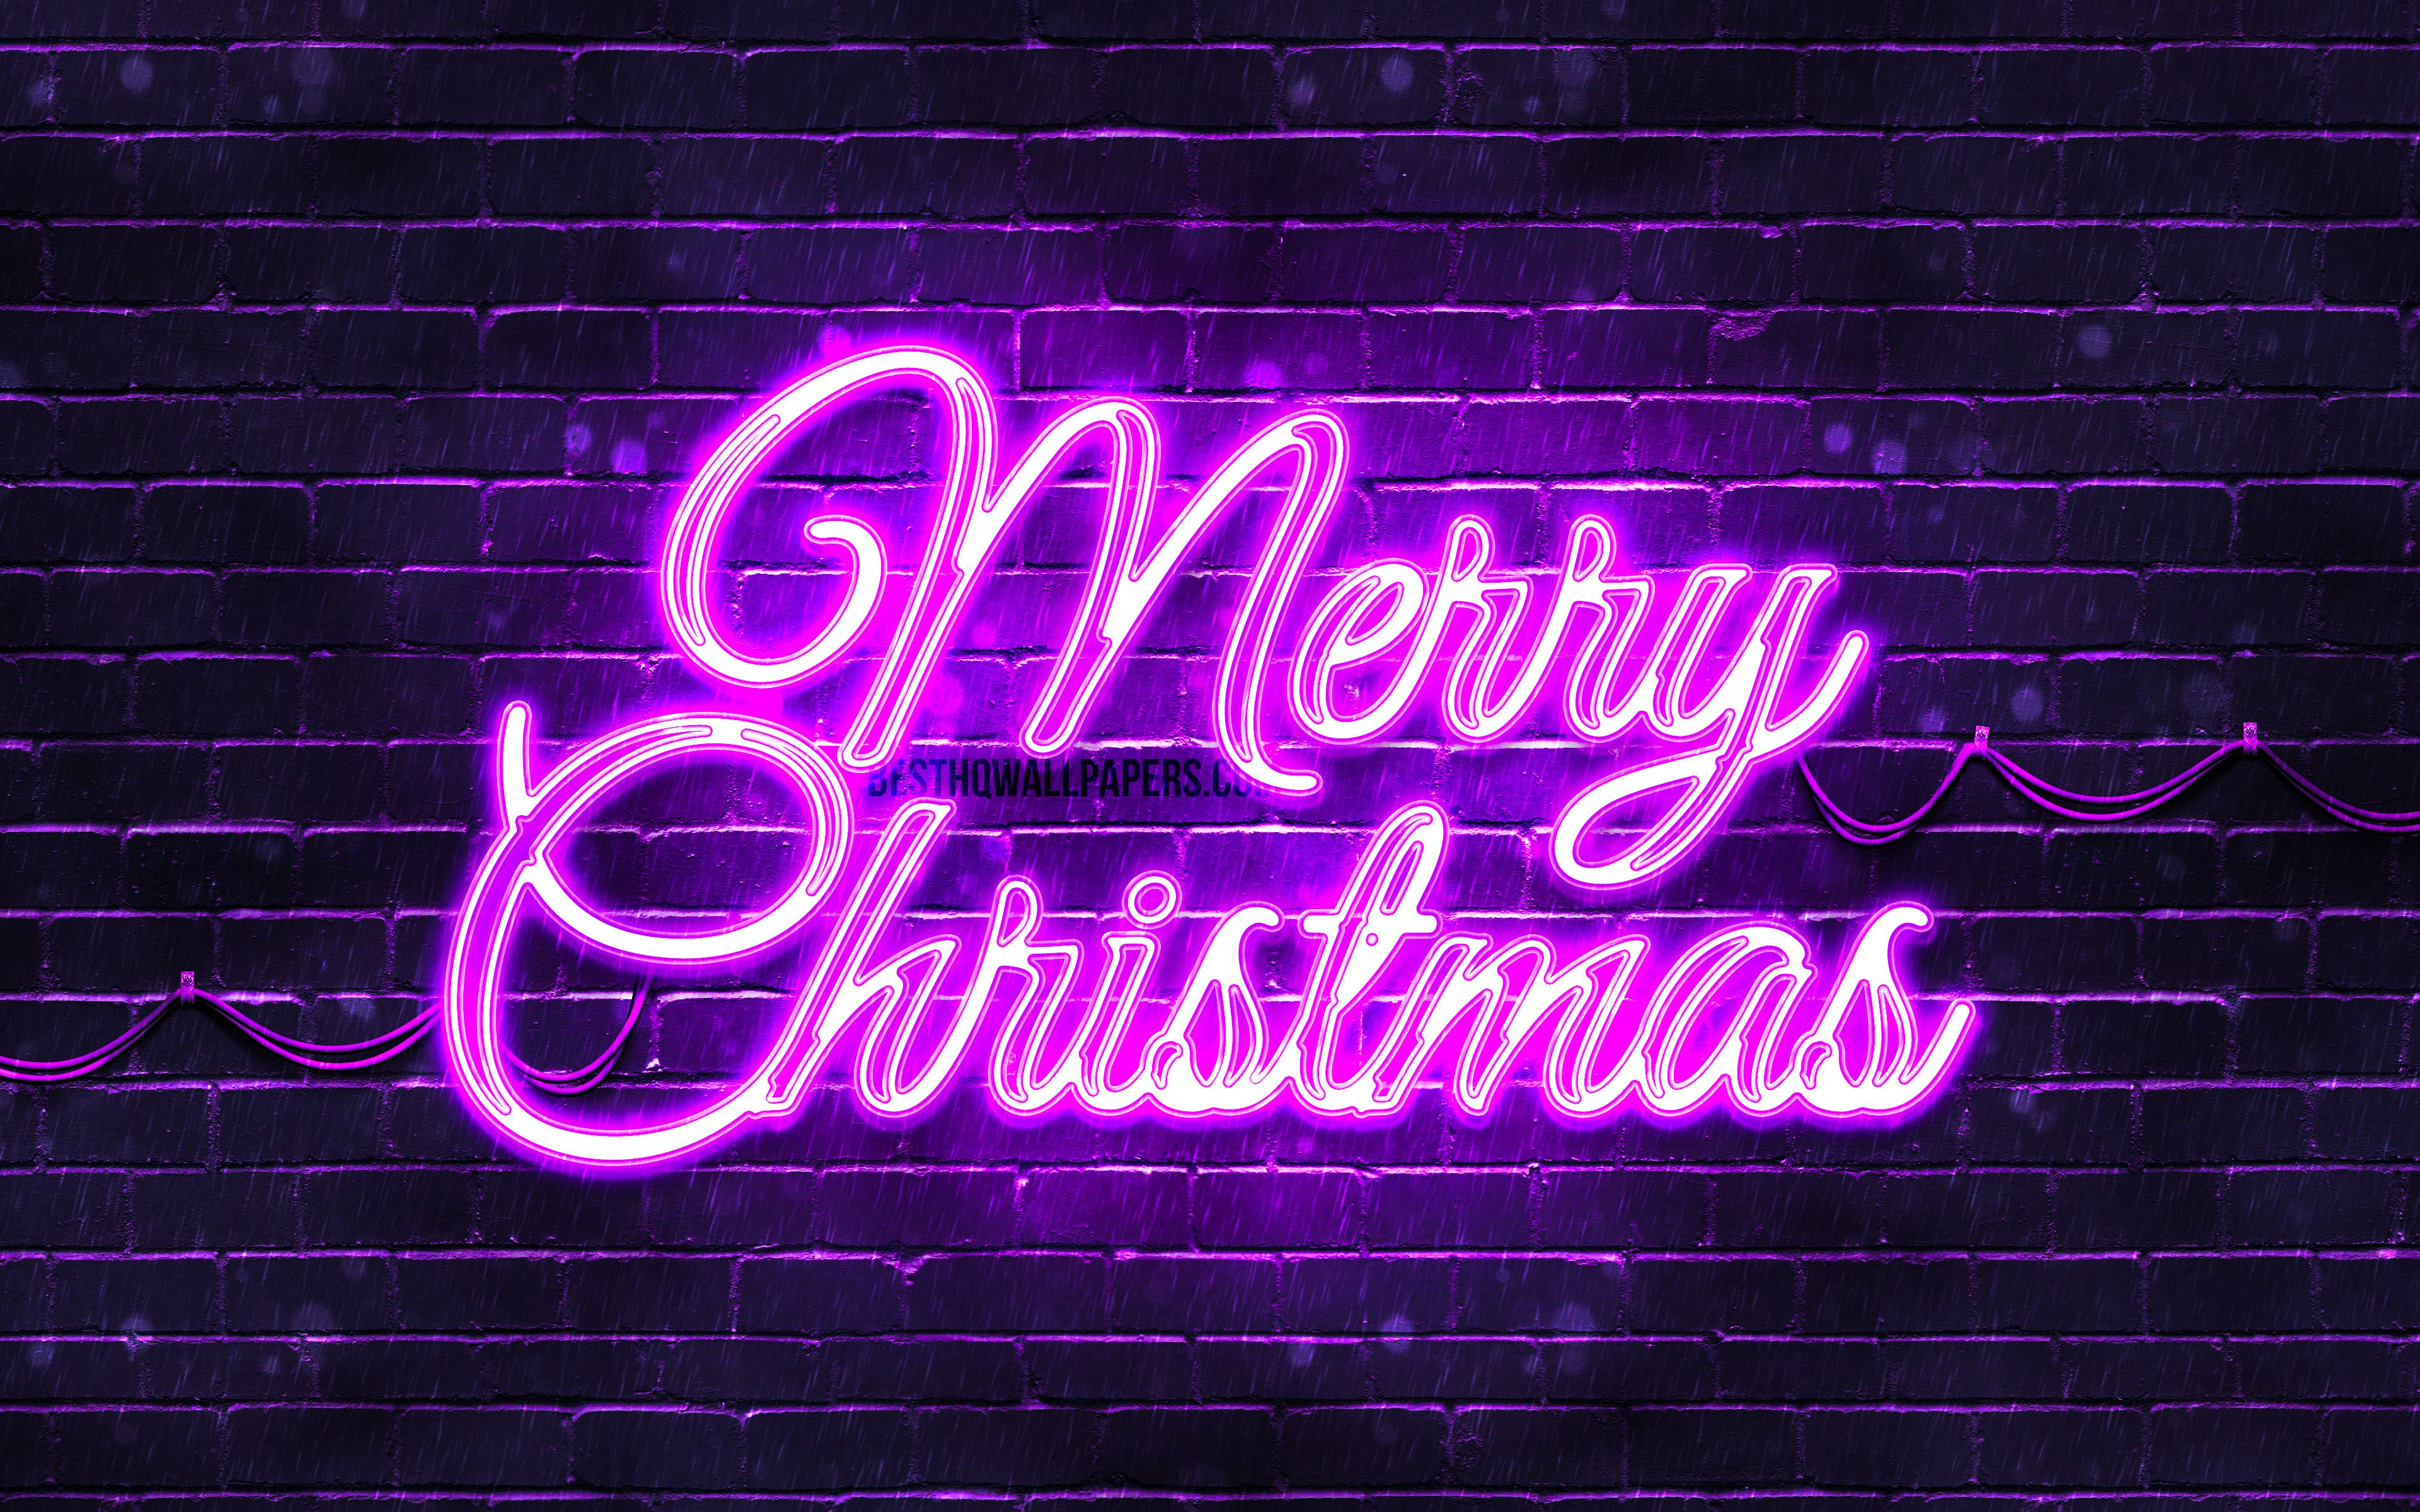 Download wallpaper Violet neon Merry Christmas, 4k, Violet brickwall, Happy New Years Concept, Violet Merry Christmas, creative, Christmas decorations, Merry Christmas, xmas decorations for desktop with resolution 3840x2400. High Quality HD picture